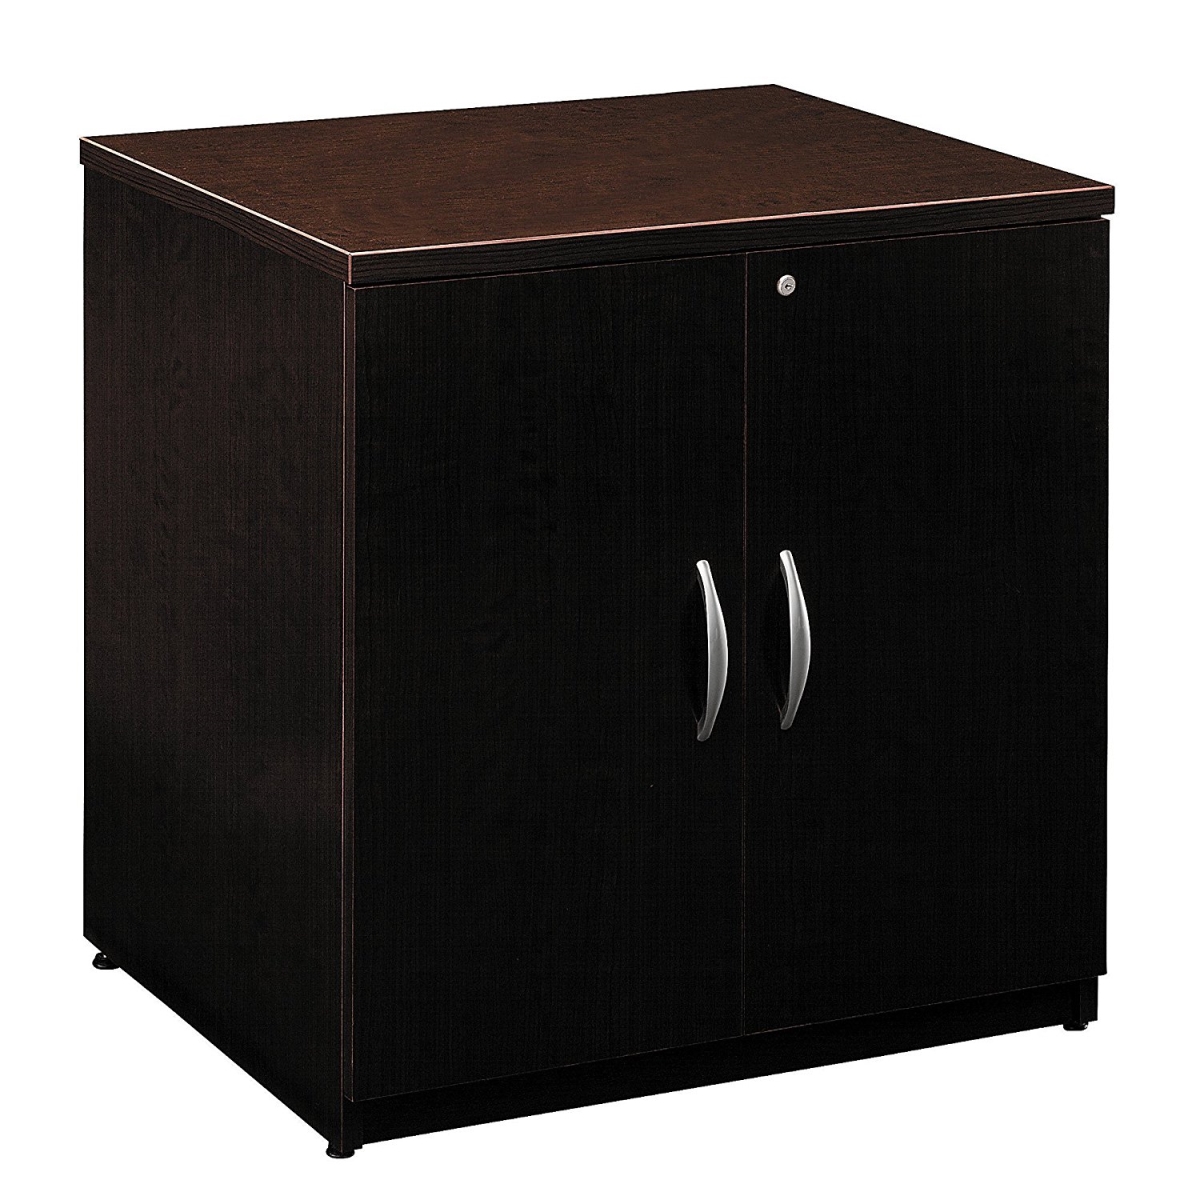 Wc12996a 30 In. Series C Collection Storage Cabinet, Mocha Cherry & Graphite Gray